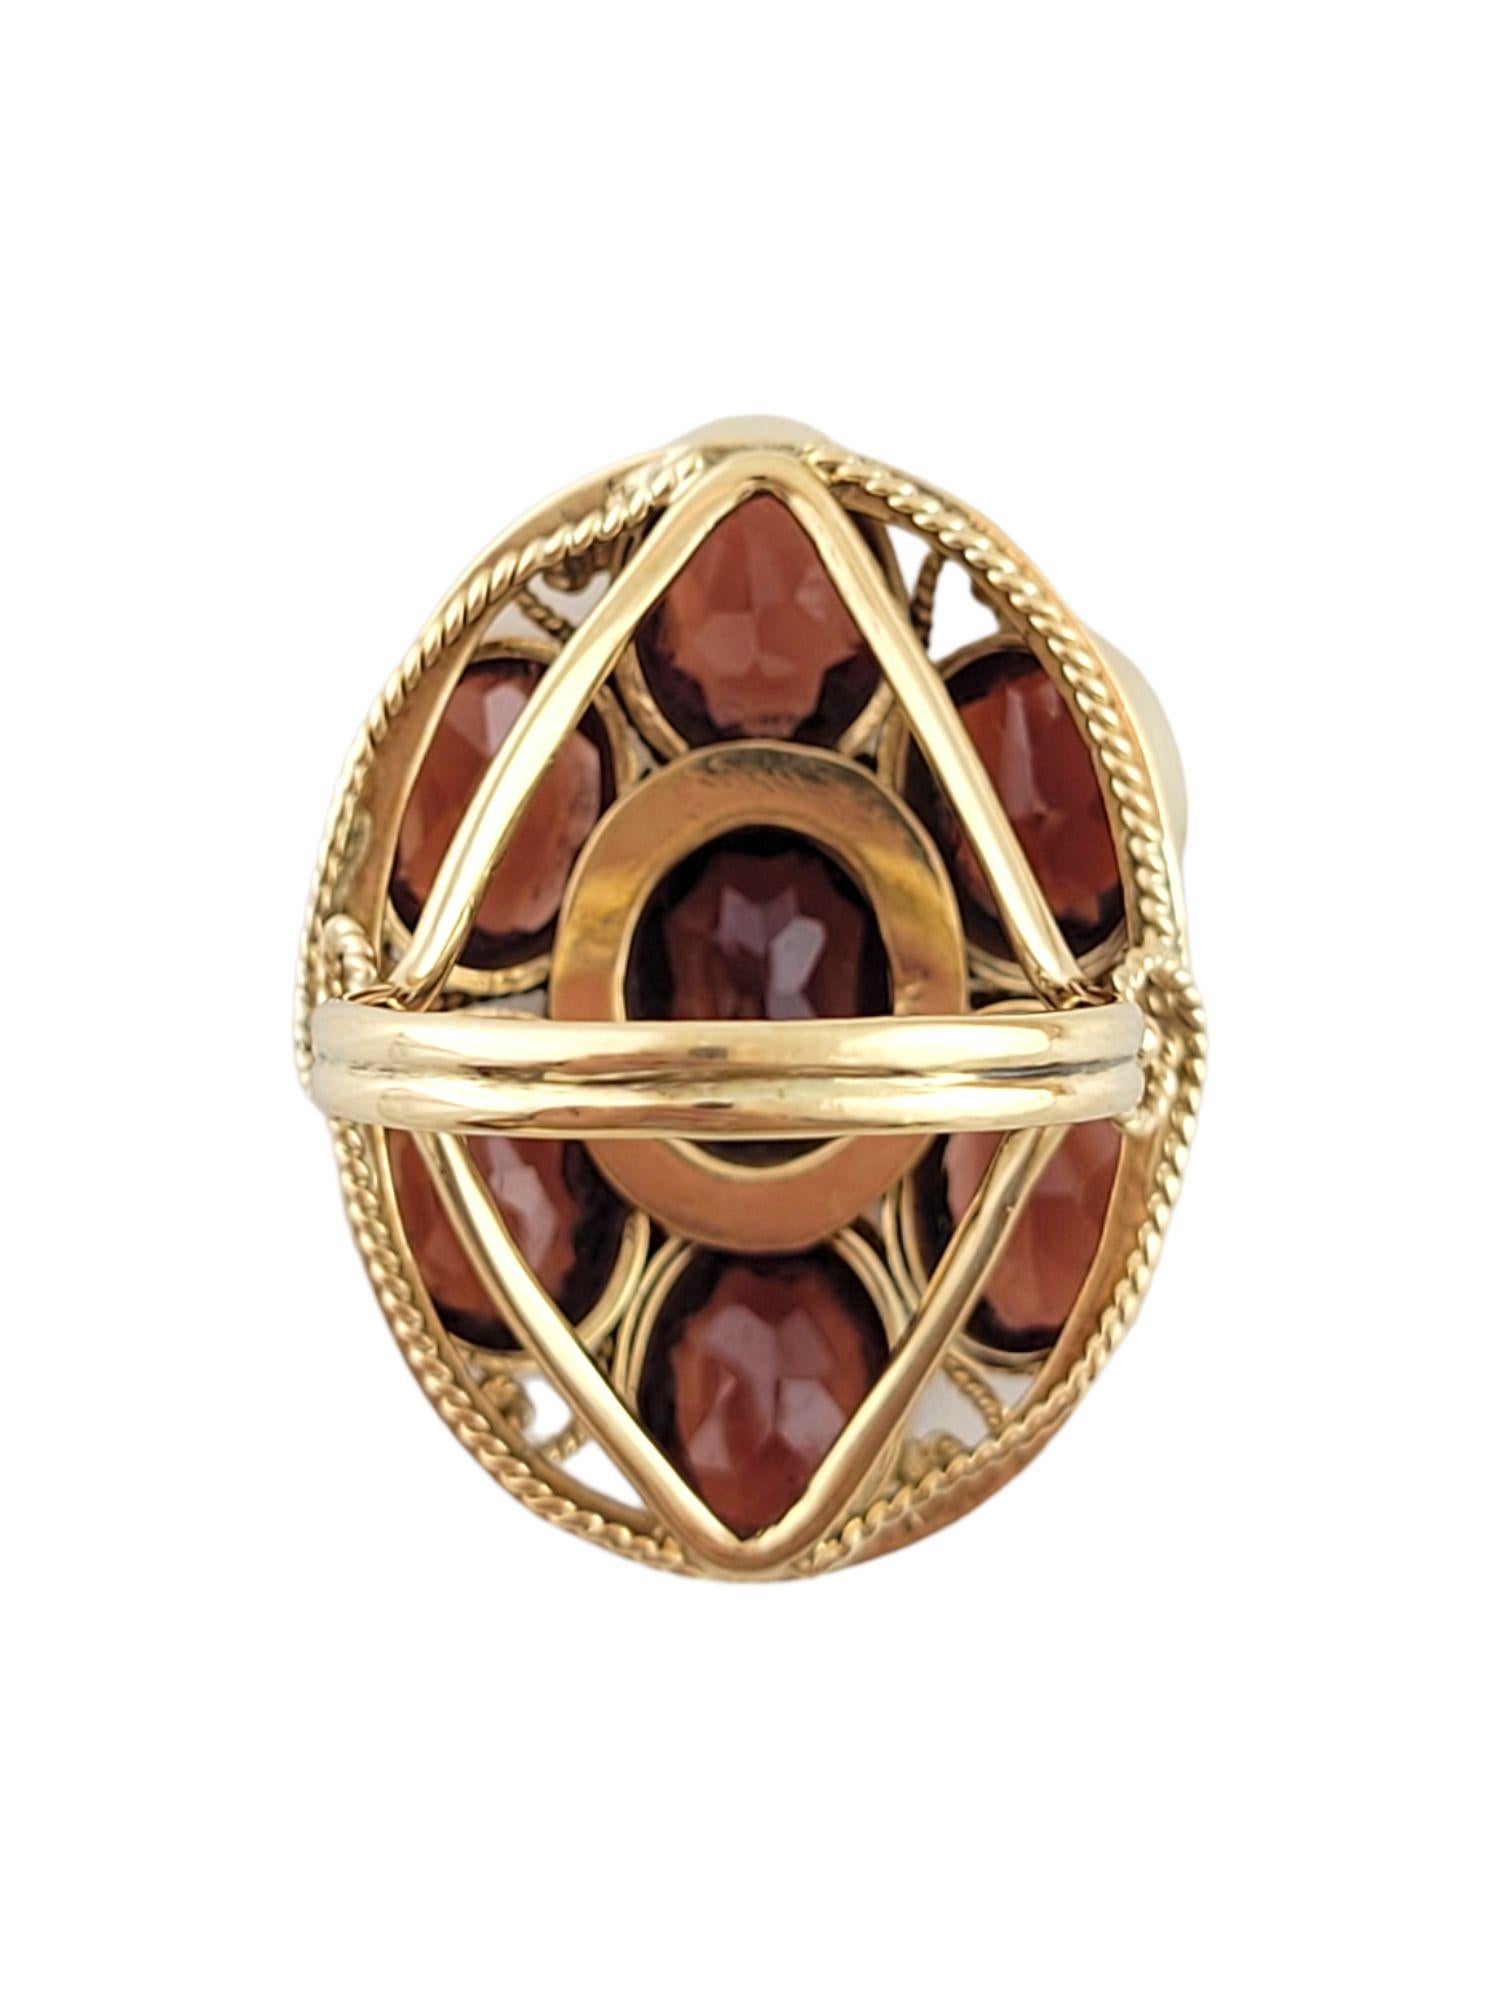 14K Yellow Gold Almandine Garnet Cocktail Ring Size 6 #14774 In Good Condition For Sale In Washington Depot, CT